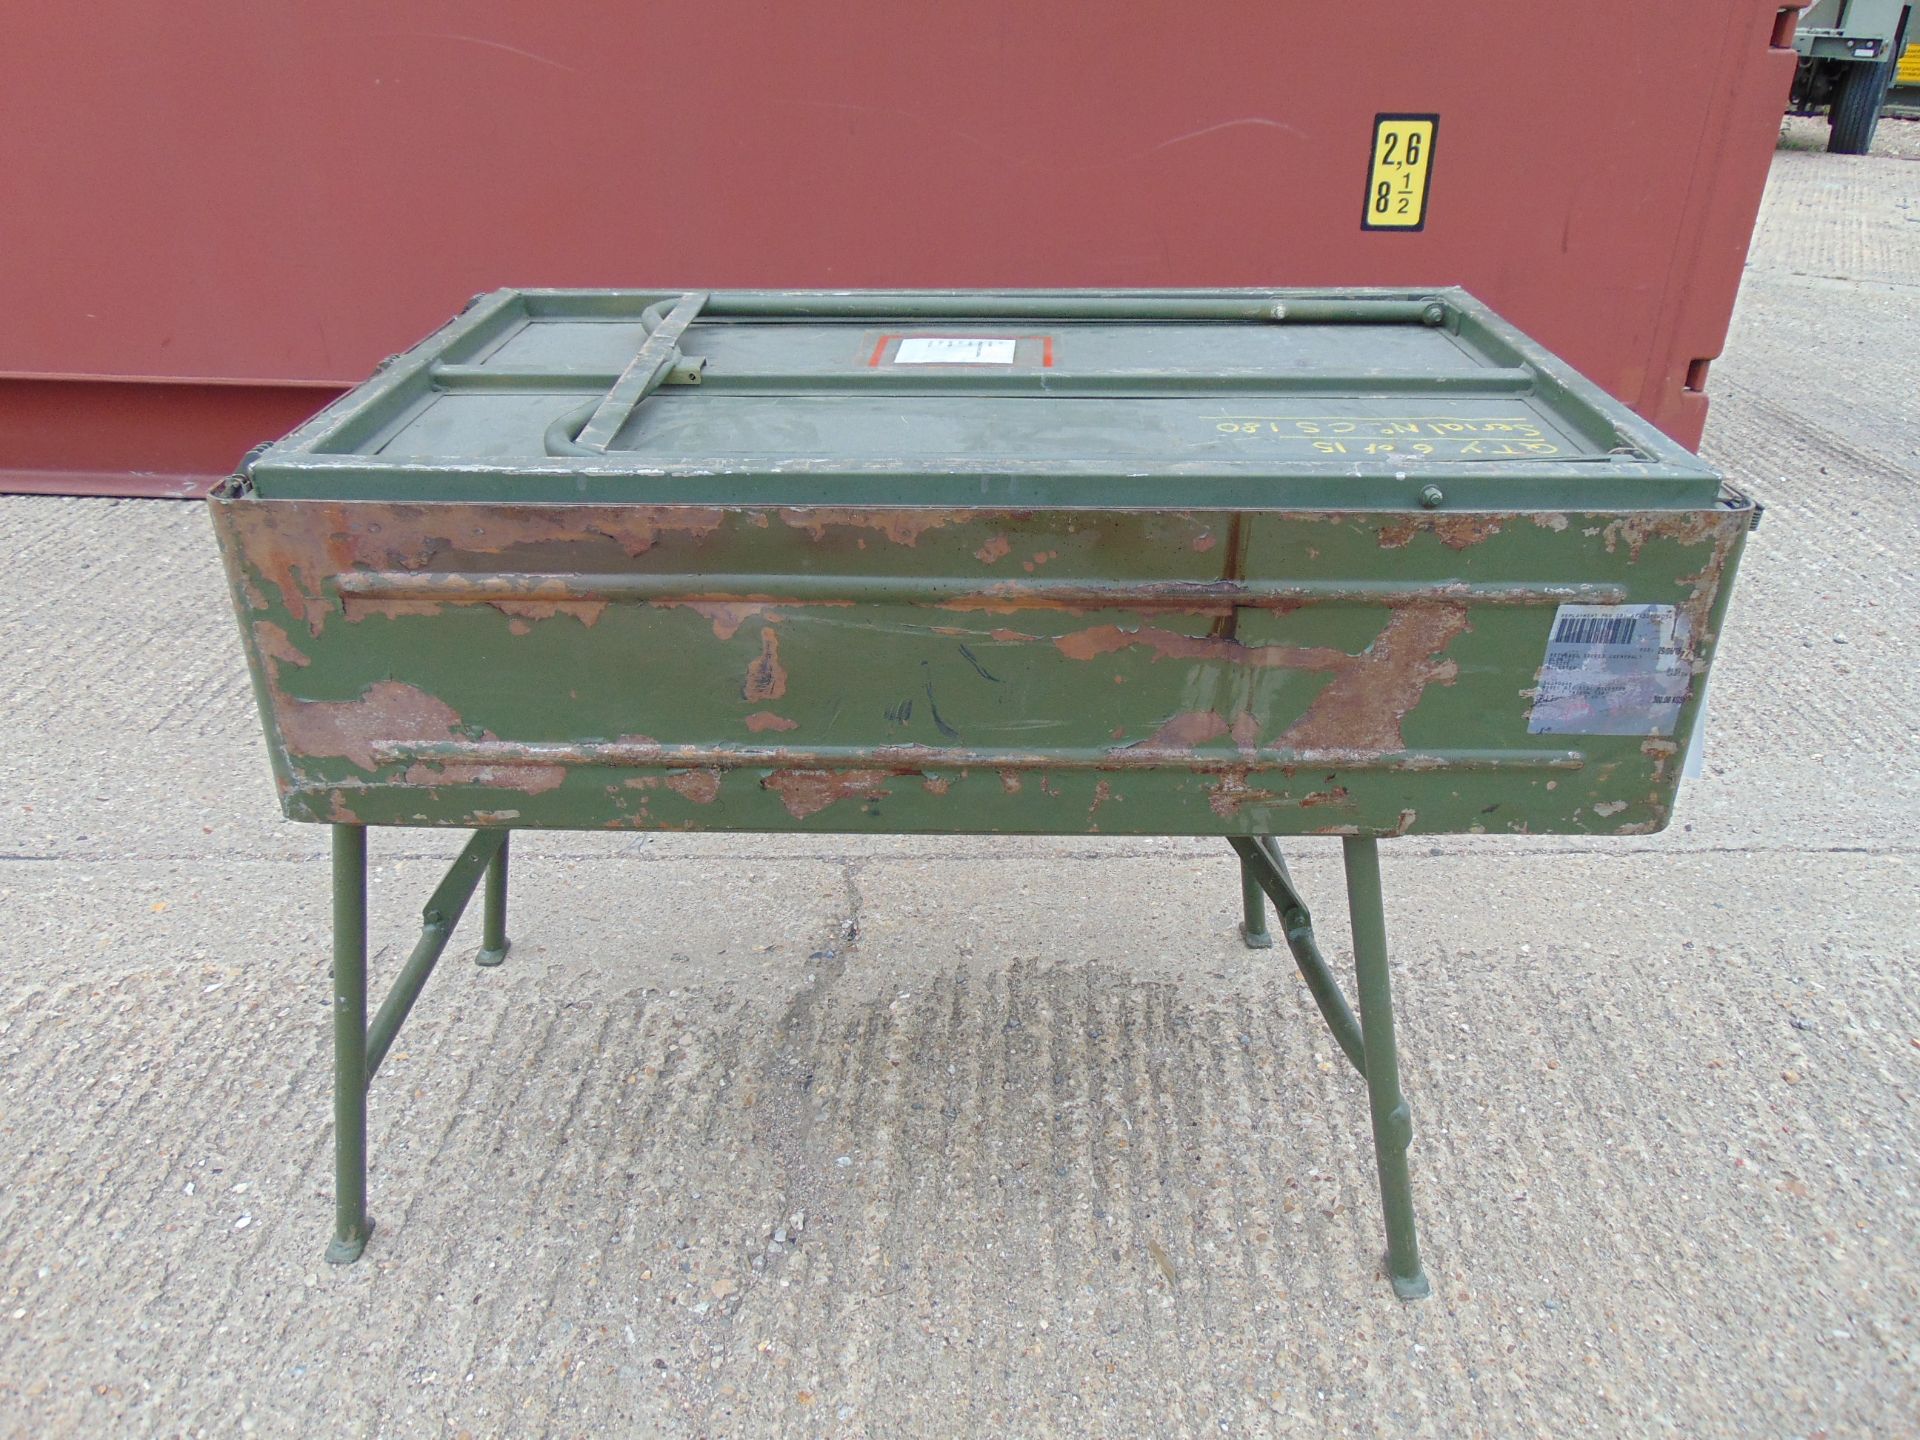 Field Kitchen No5 4 Burner Propane Cooking Stove - Image 6 of 9